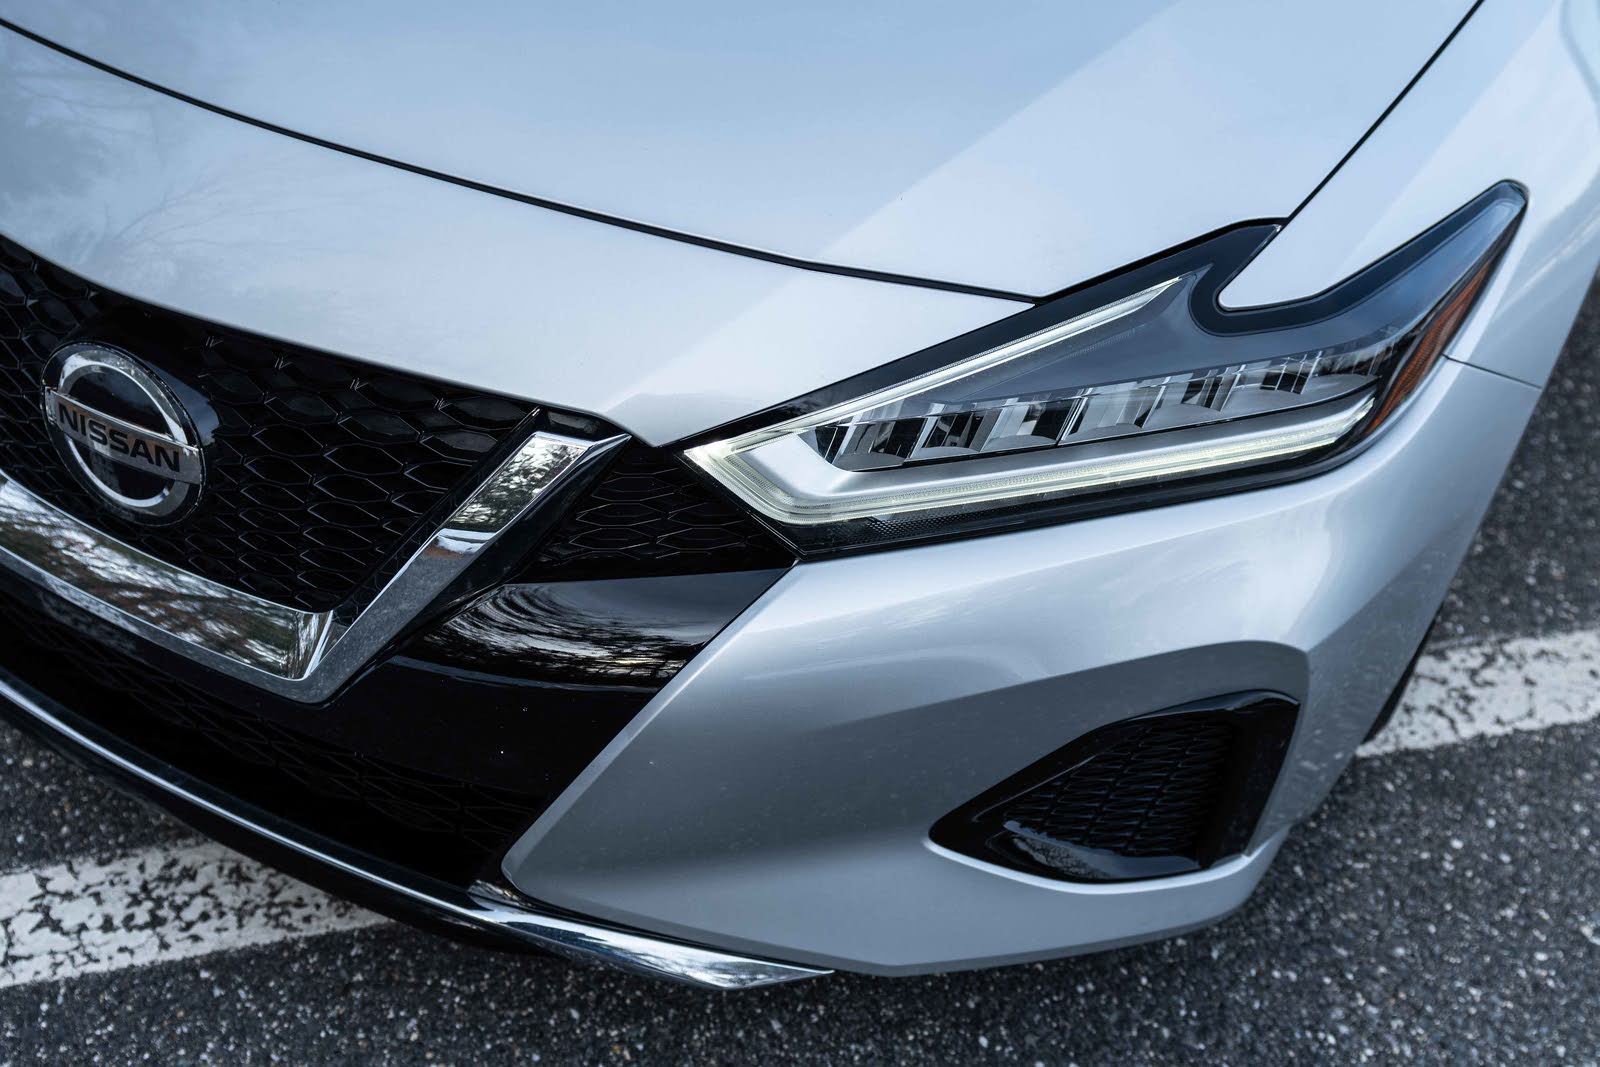 2021 Nissan Maxima Review & Ratings